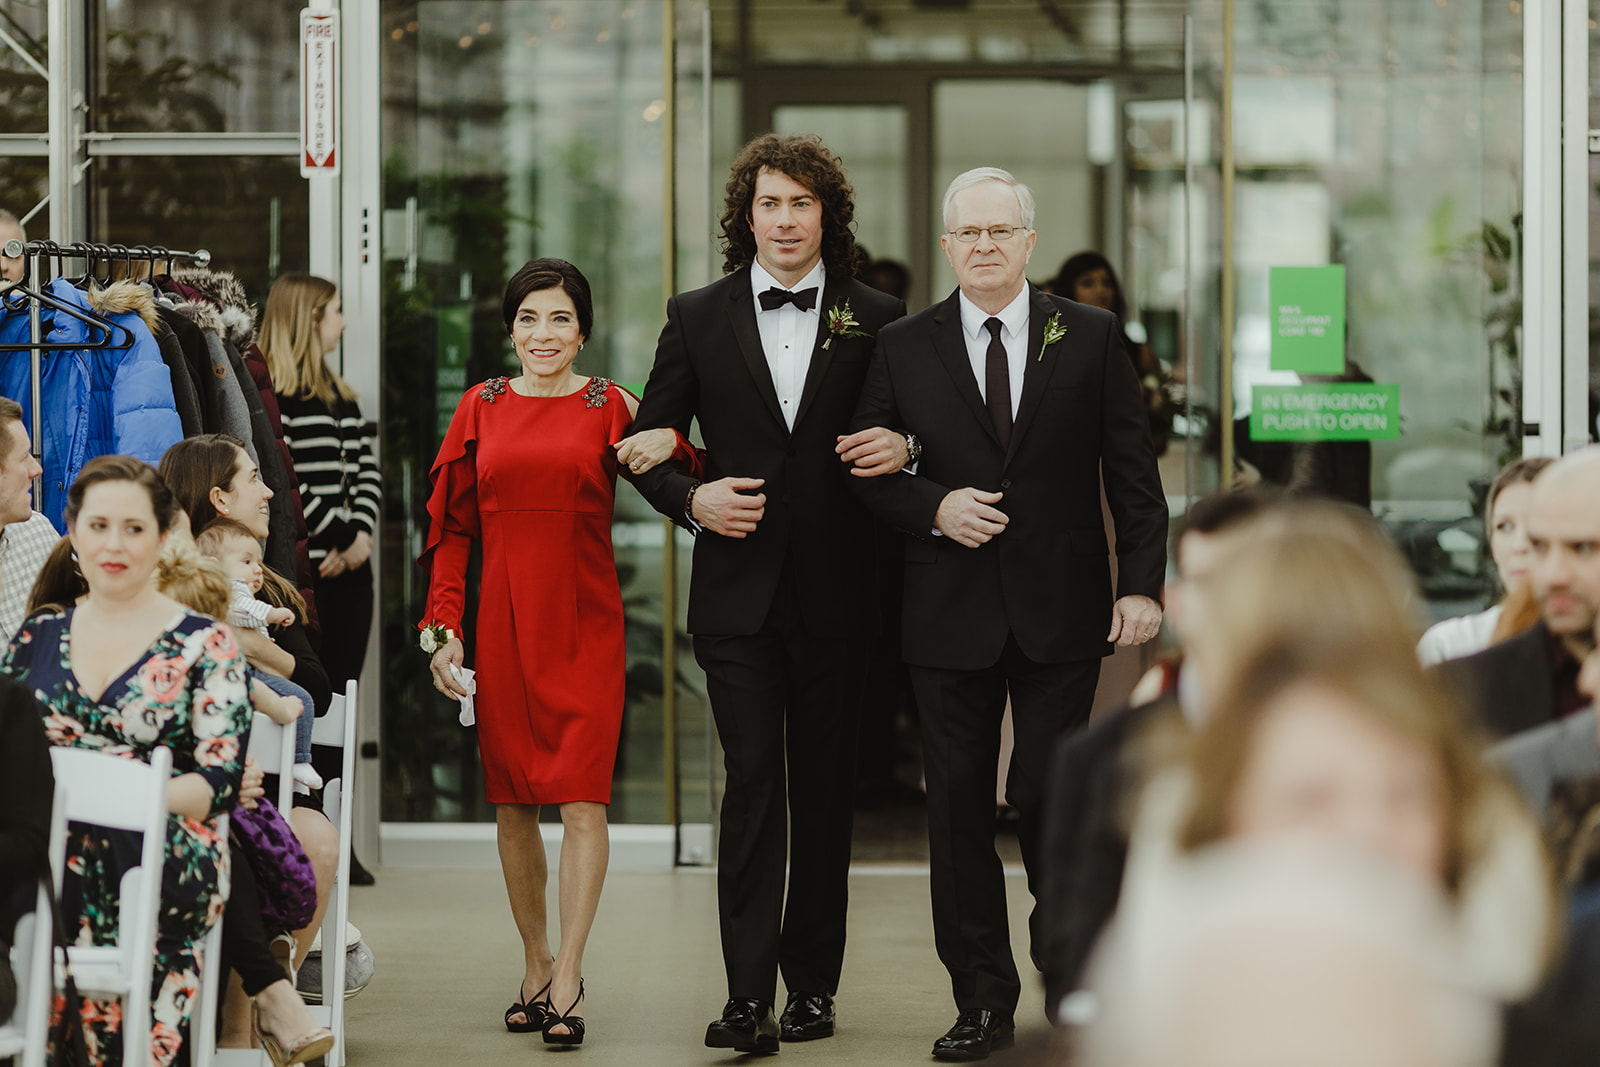 A groom walking his parents down the aisle